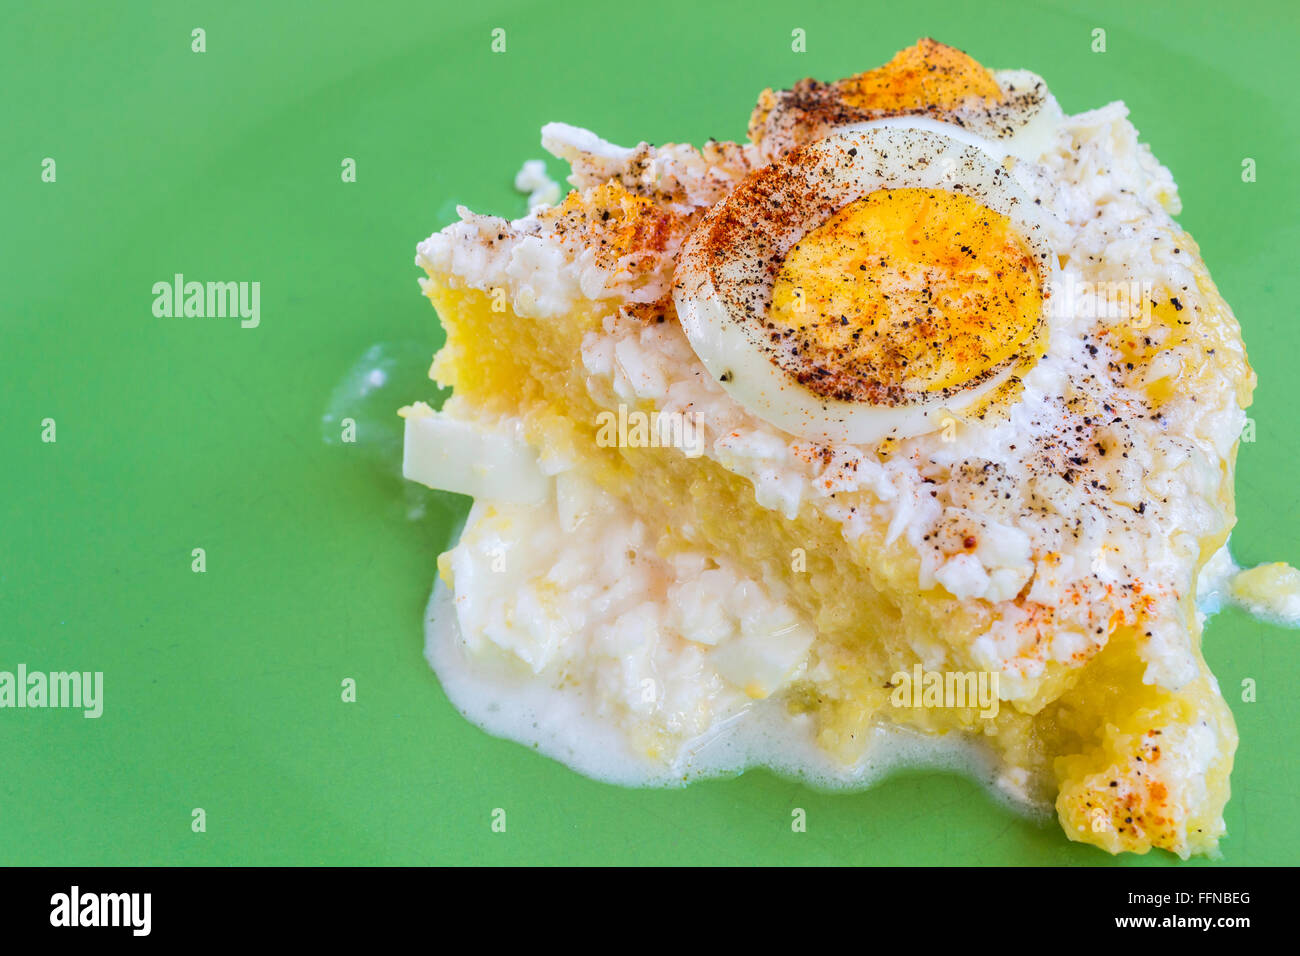 Polenta (mamaliga) slice with boiled eggs, sour cream and goat cheese on a green plate Stock Photo